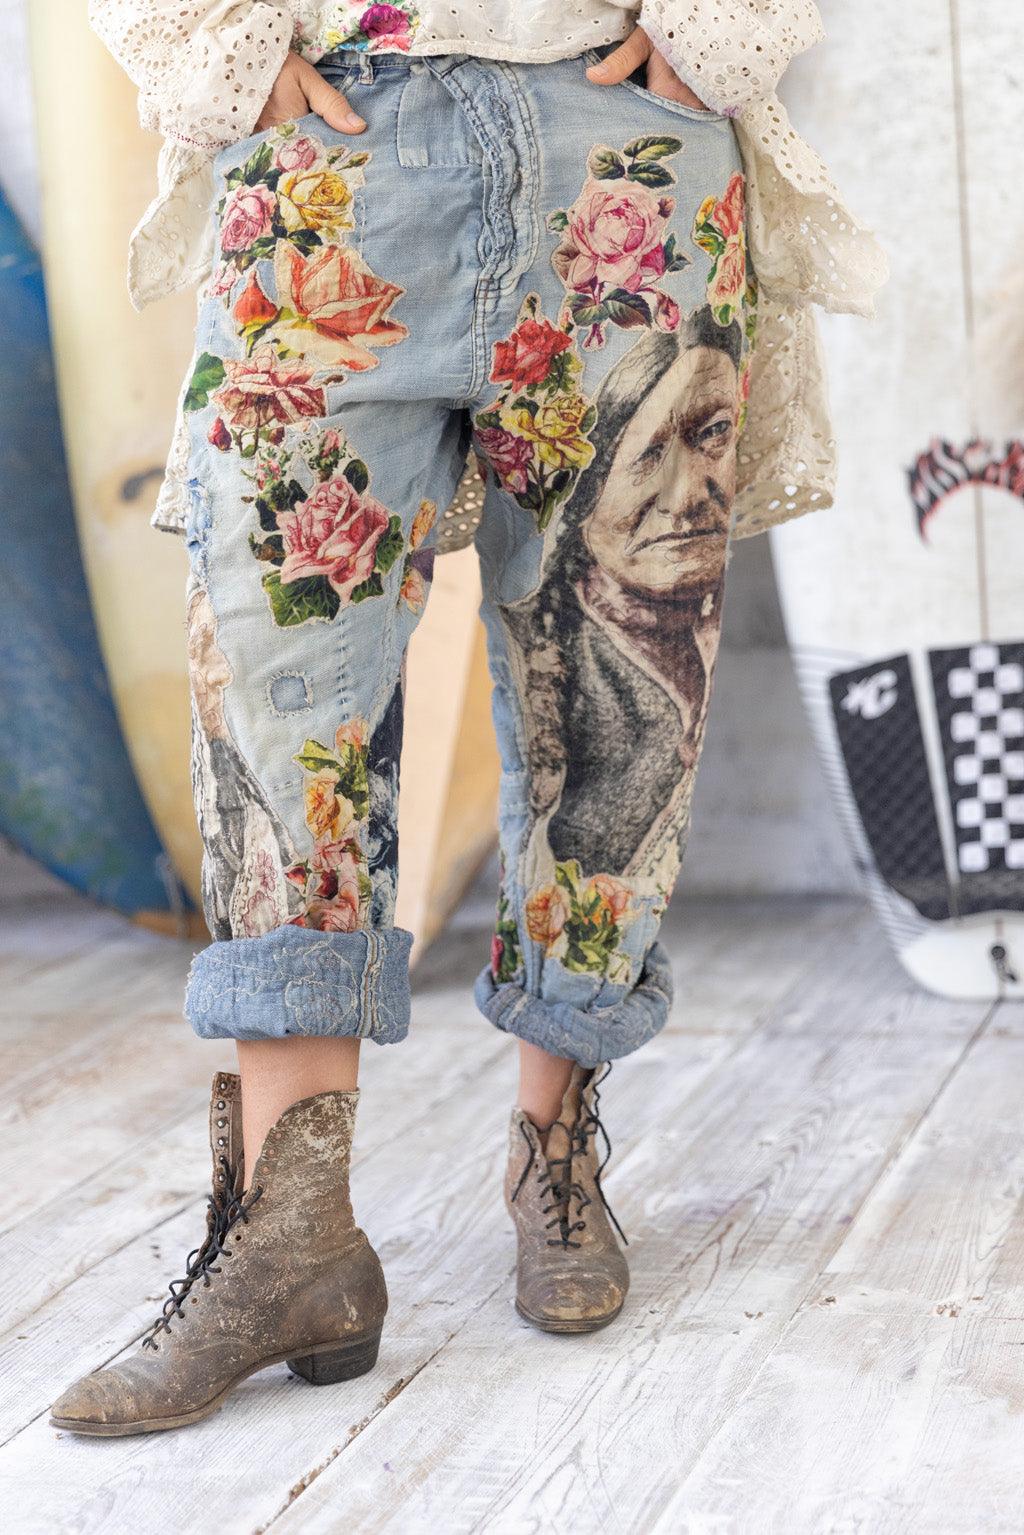 Magnolia Pearl Cotton Twill Miner Pants with Sunflower Applique, Daisies  and Bees in Ashbury Peace Pants 433 - The Walnut Tree Shop Magnolia Pearl  Cotton Twill Miner Pants with Sunflower Applique, Daisies